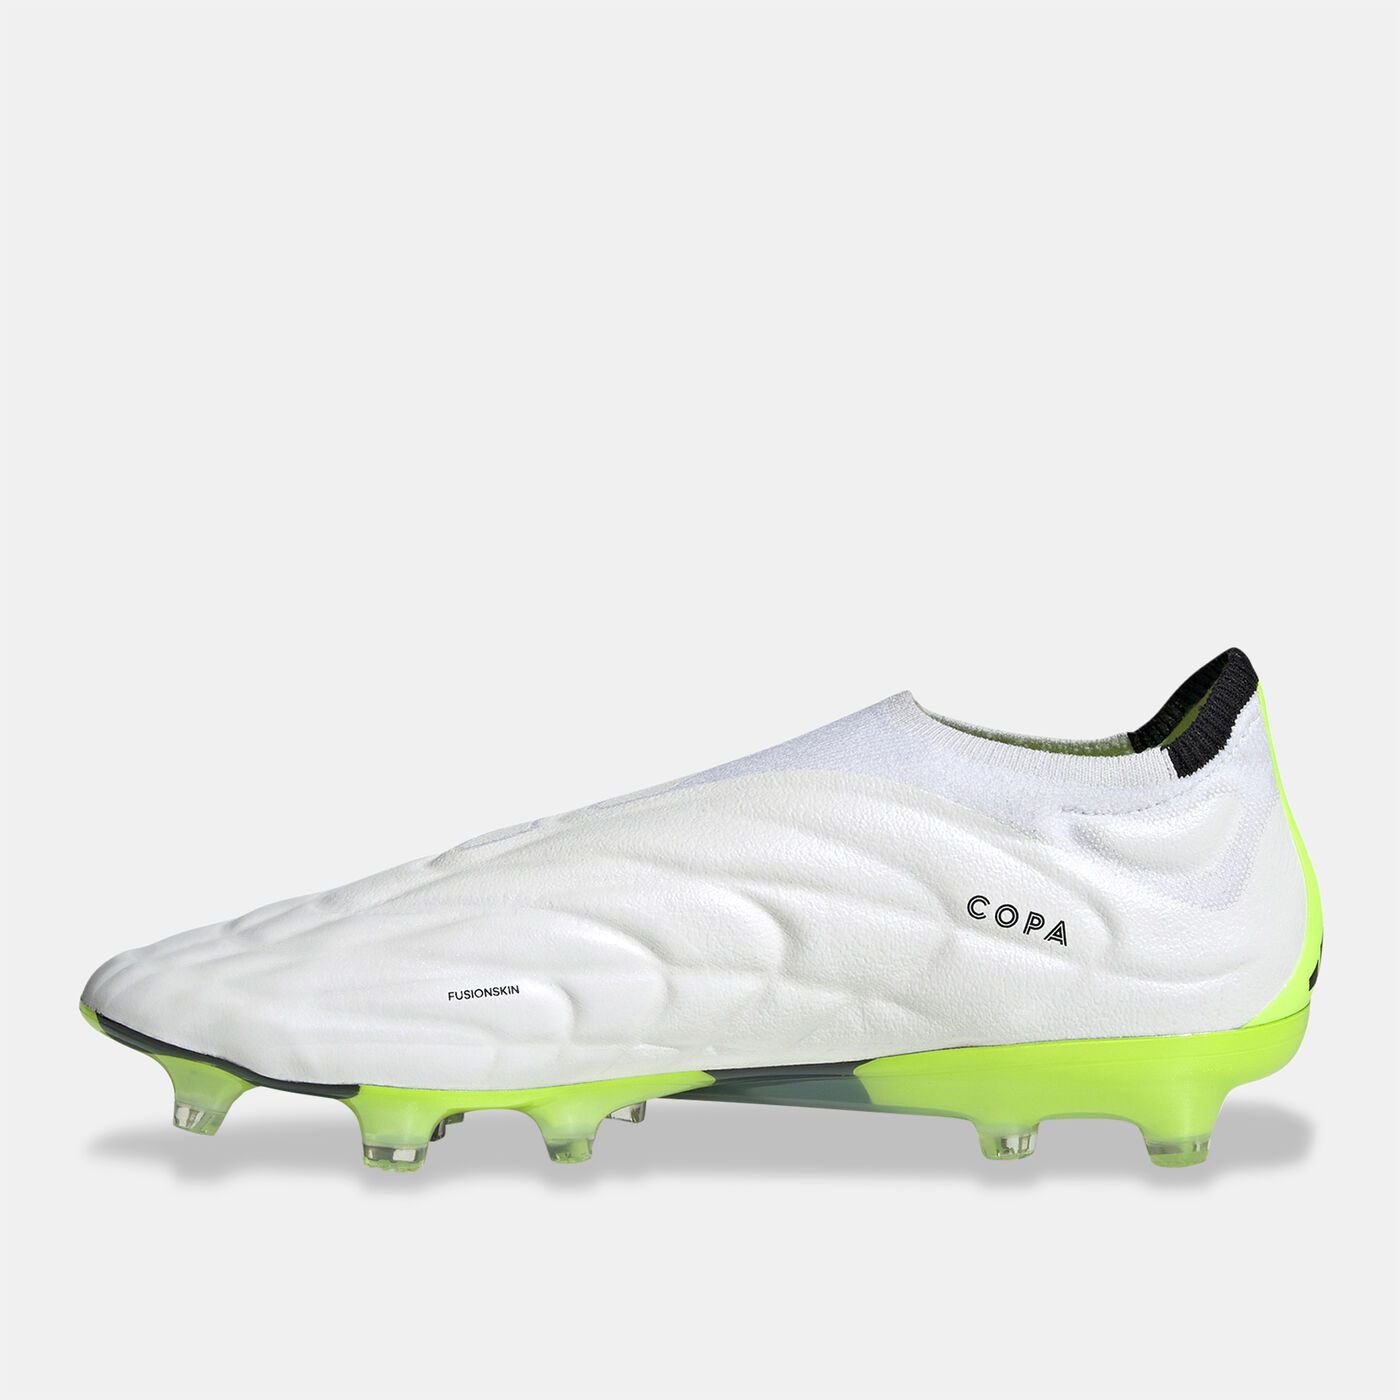 COPA PURE+ Firm Ground Football Shoe